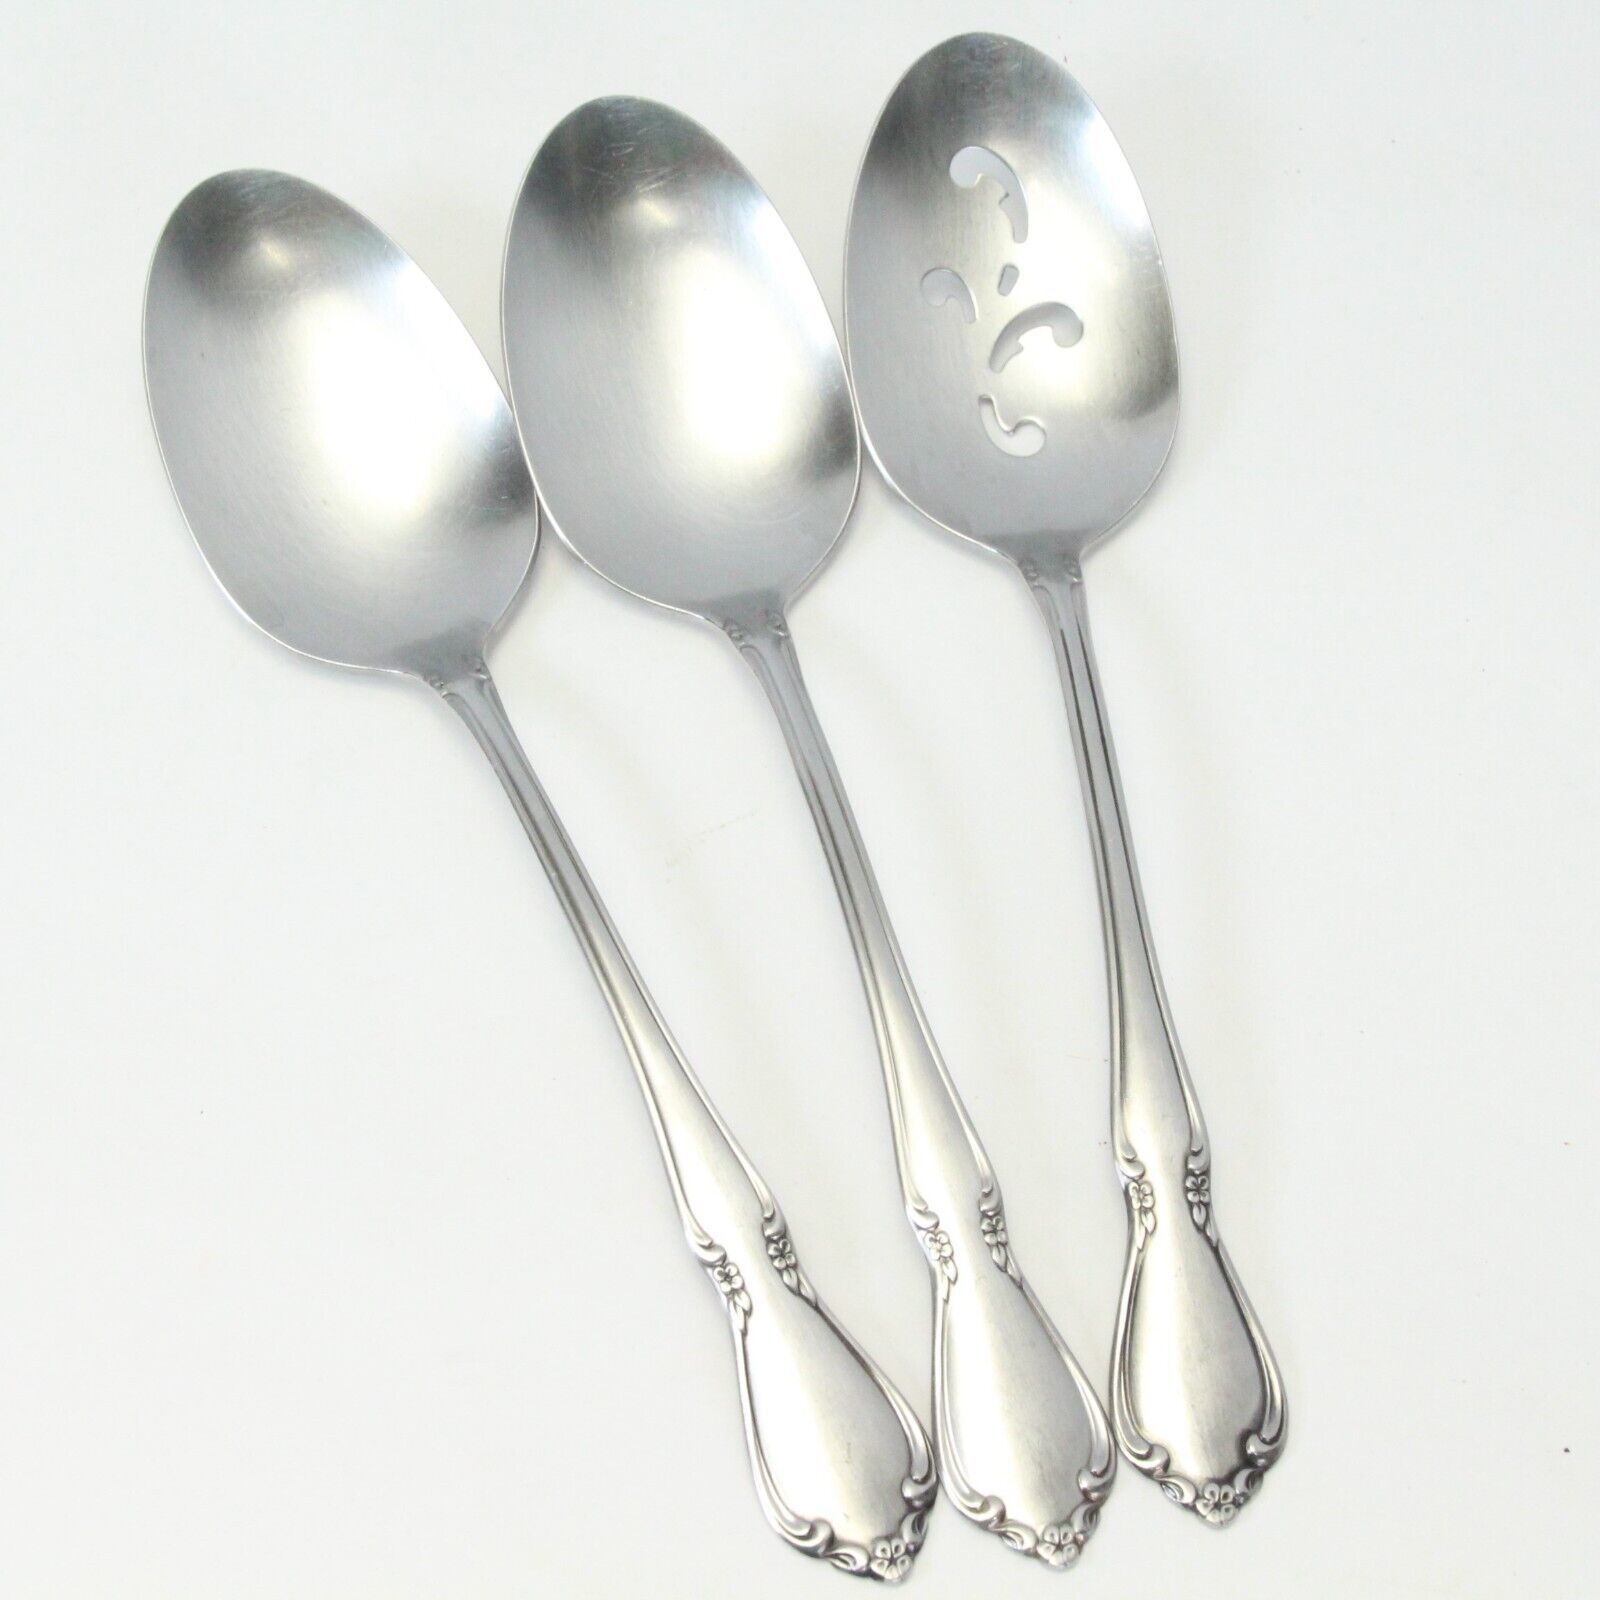 Primary image for Oneidacraft Chateau Serving Spoons SATIN 8 1/4" Stainless Lot of 3